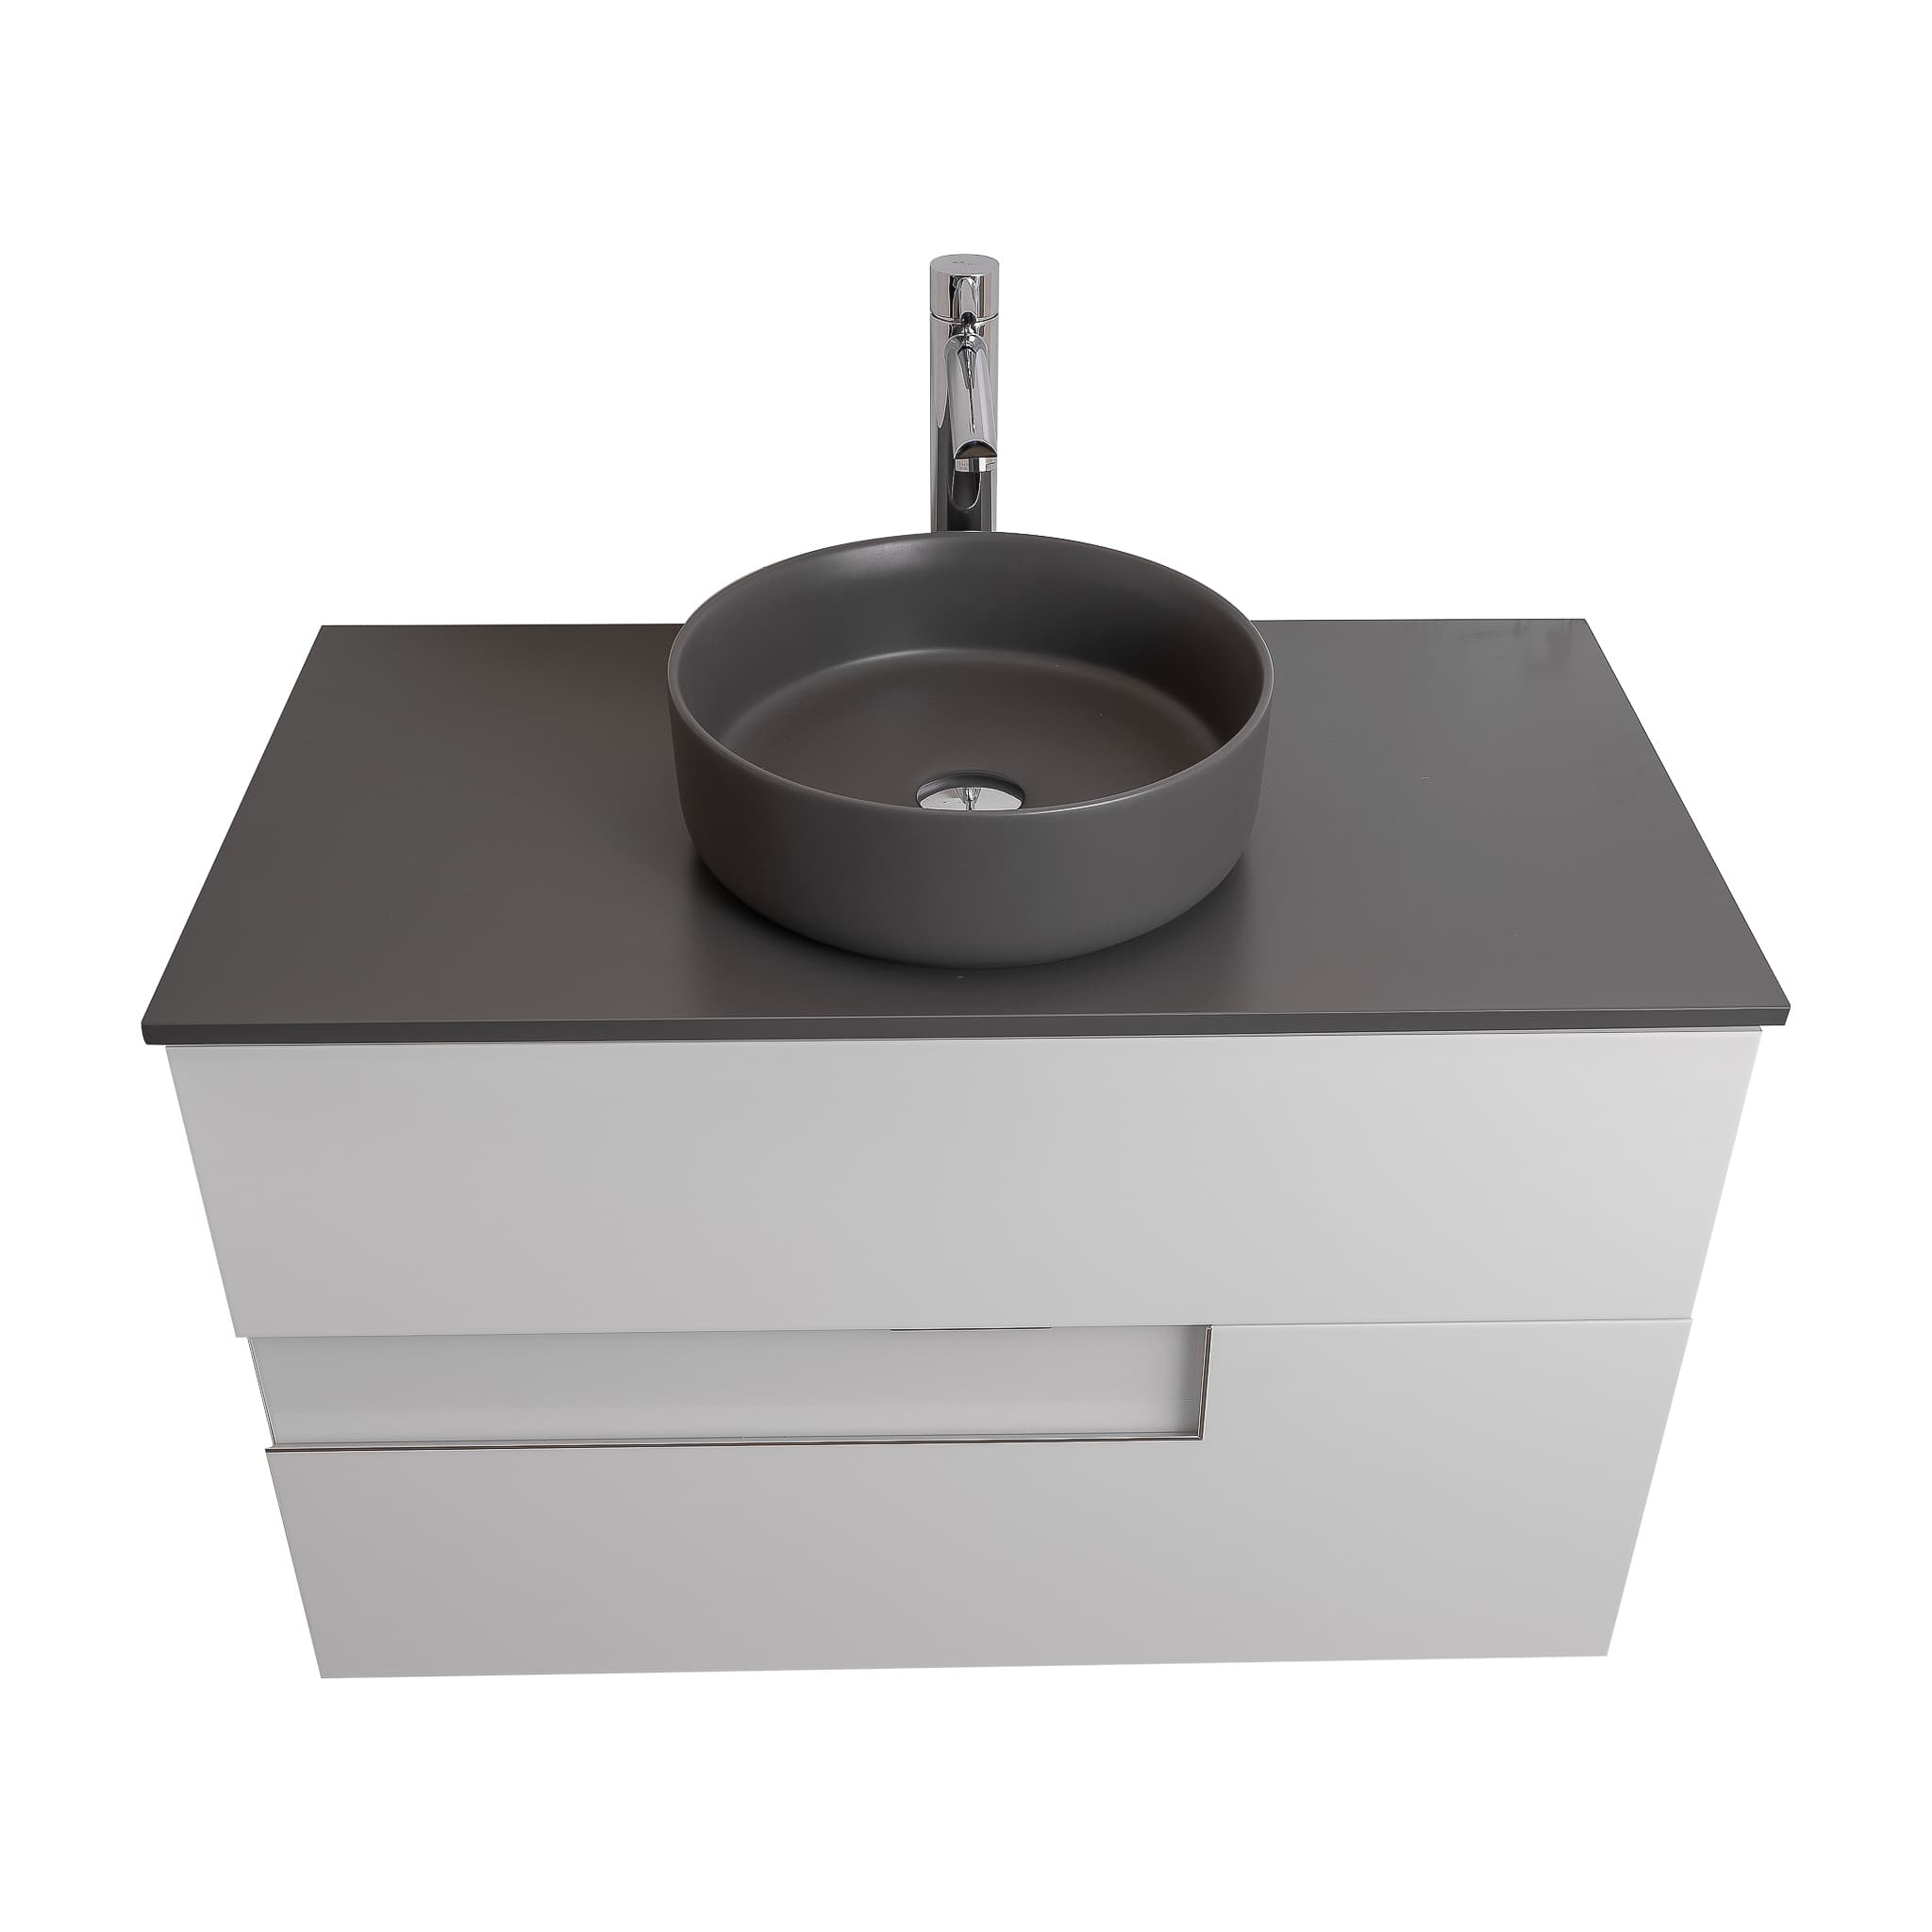 Vision 39.5 White High Gloss Cabinet, Ares Grey Ceniza Top And Ares Grey Ceniza Ceramic Basin, Wall Mounted Modern Vanity Set